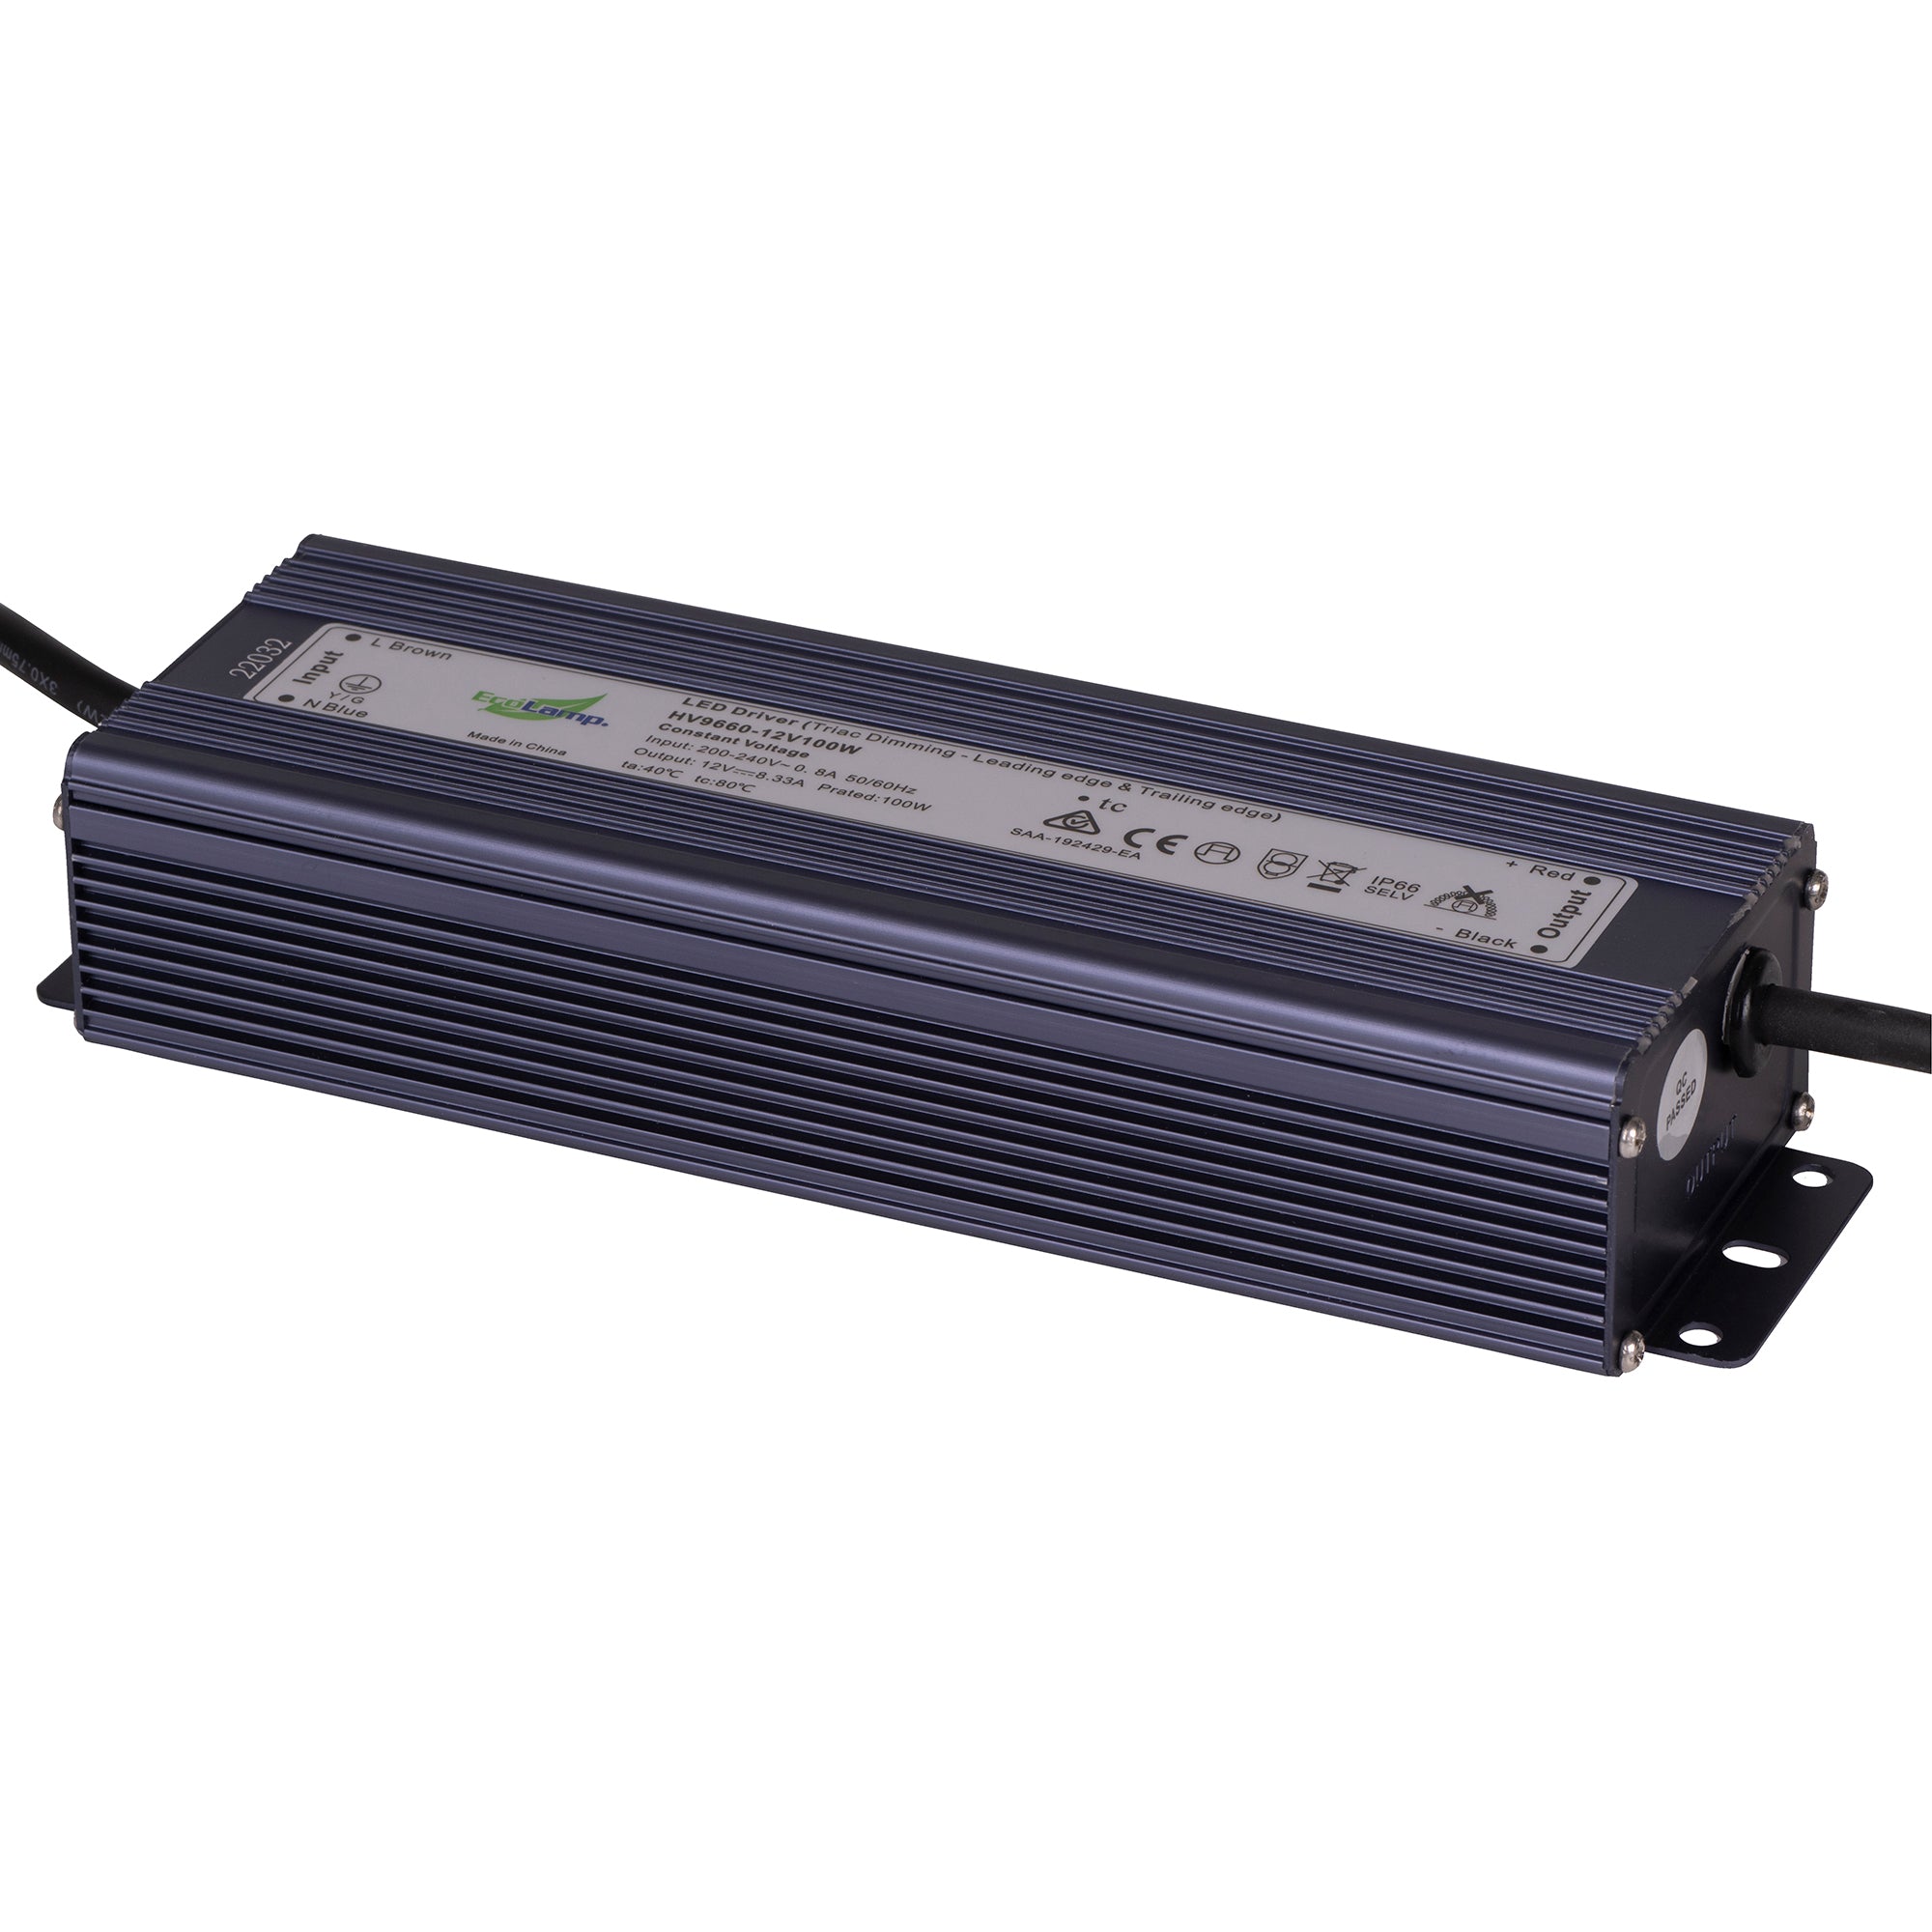 HV9660-100W - 100W Weatherproof Dimmable LED Driver